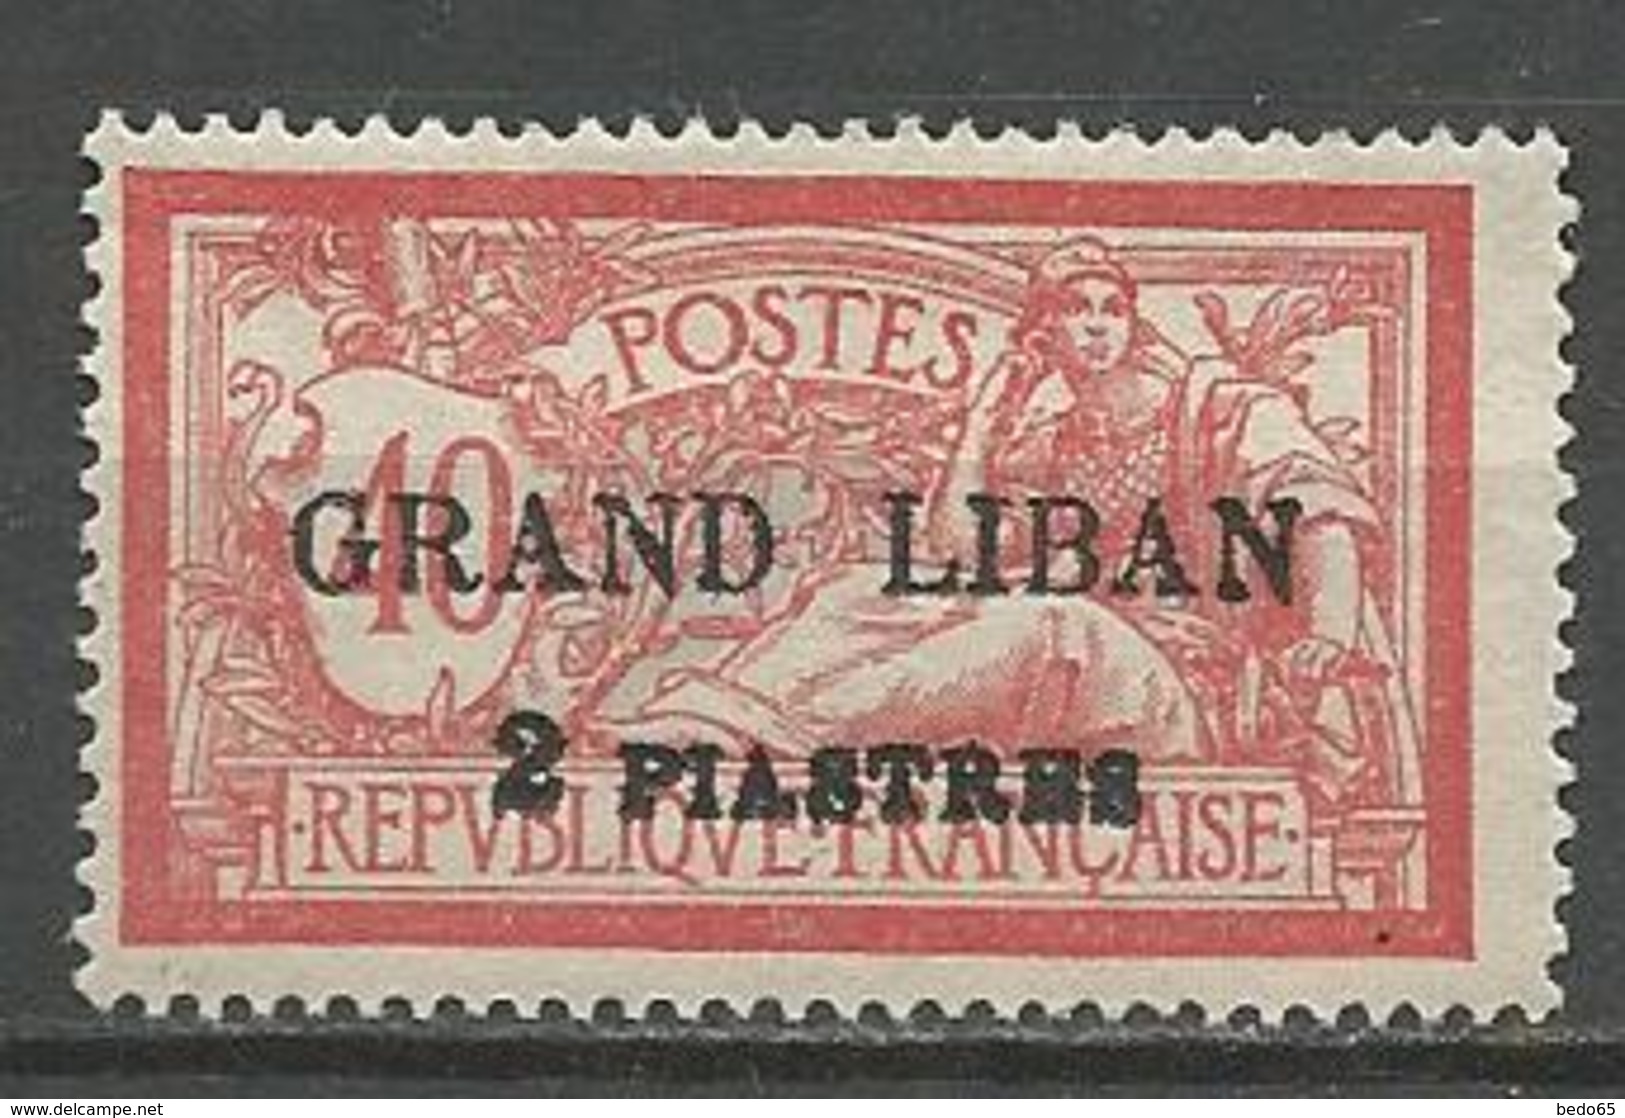 GRAND LIBAN N° 10 Surcharge Lourde NEUF* TRACE DE CHARNIERE TB / MH - Unused Stamps